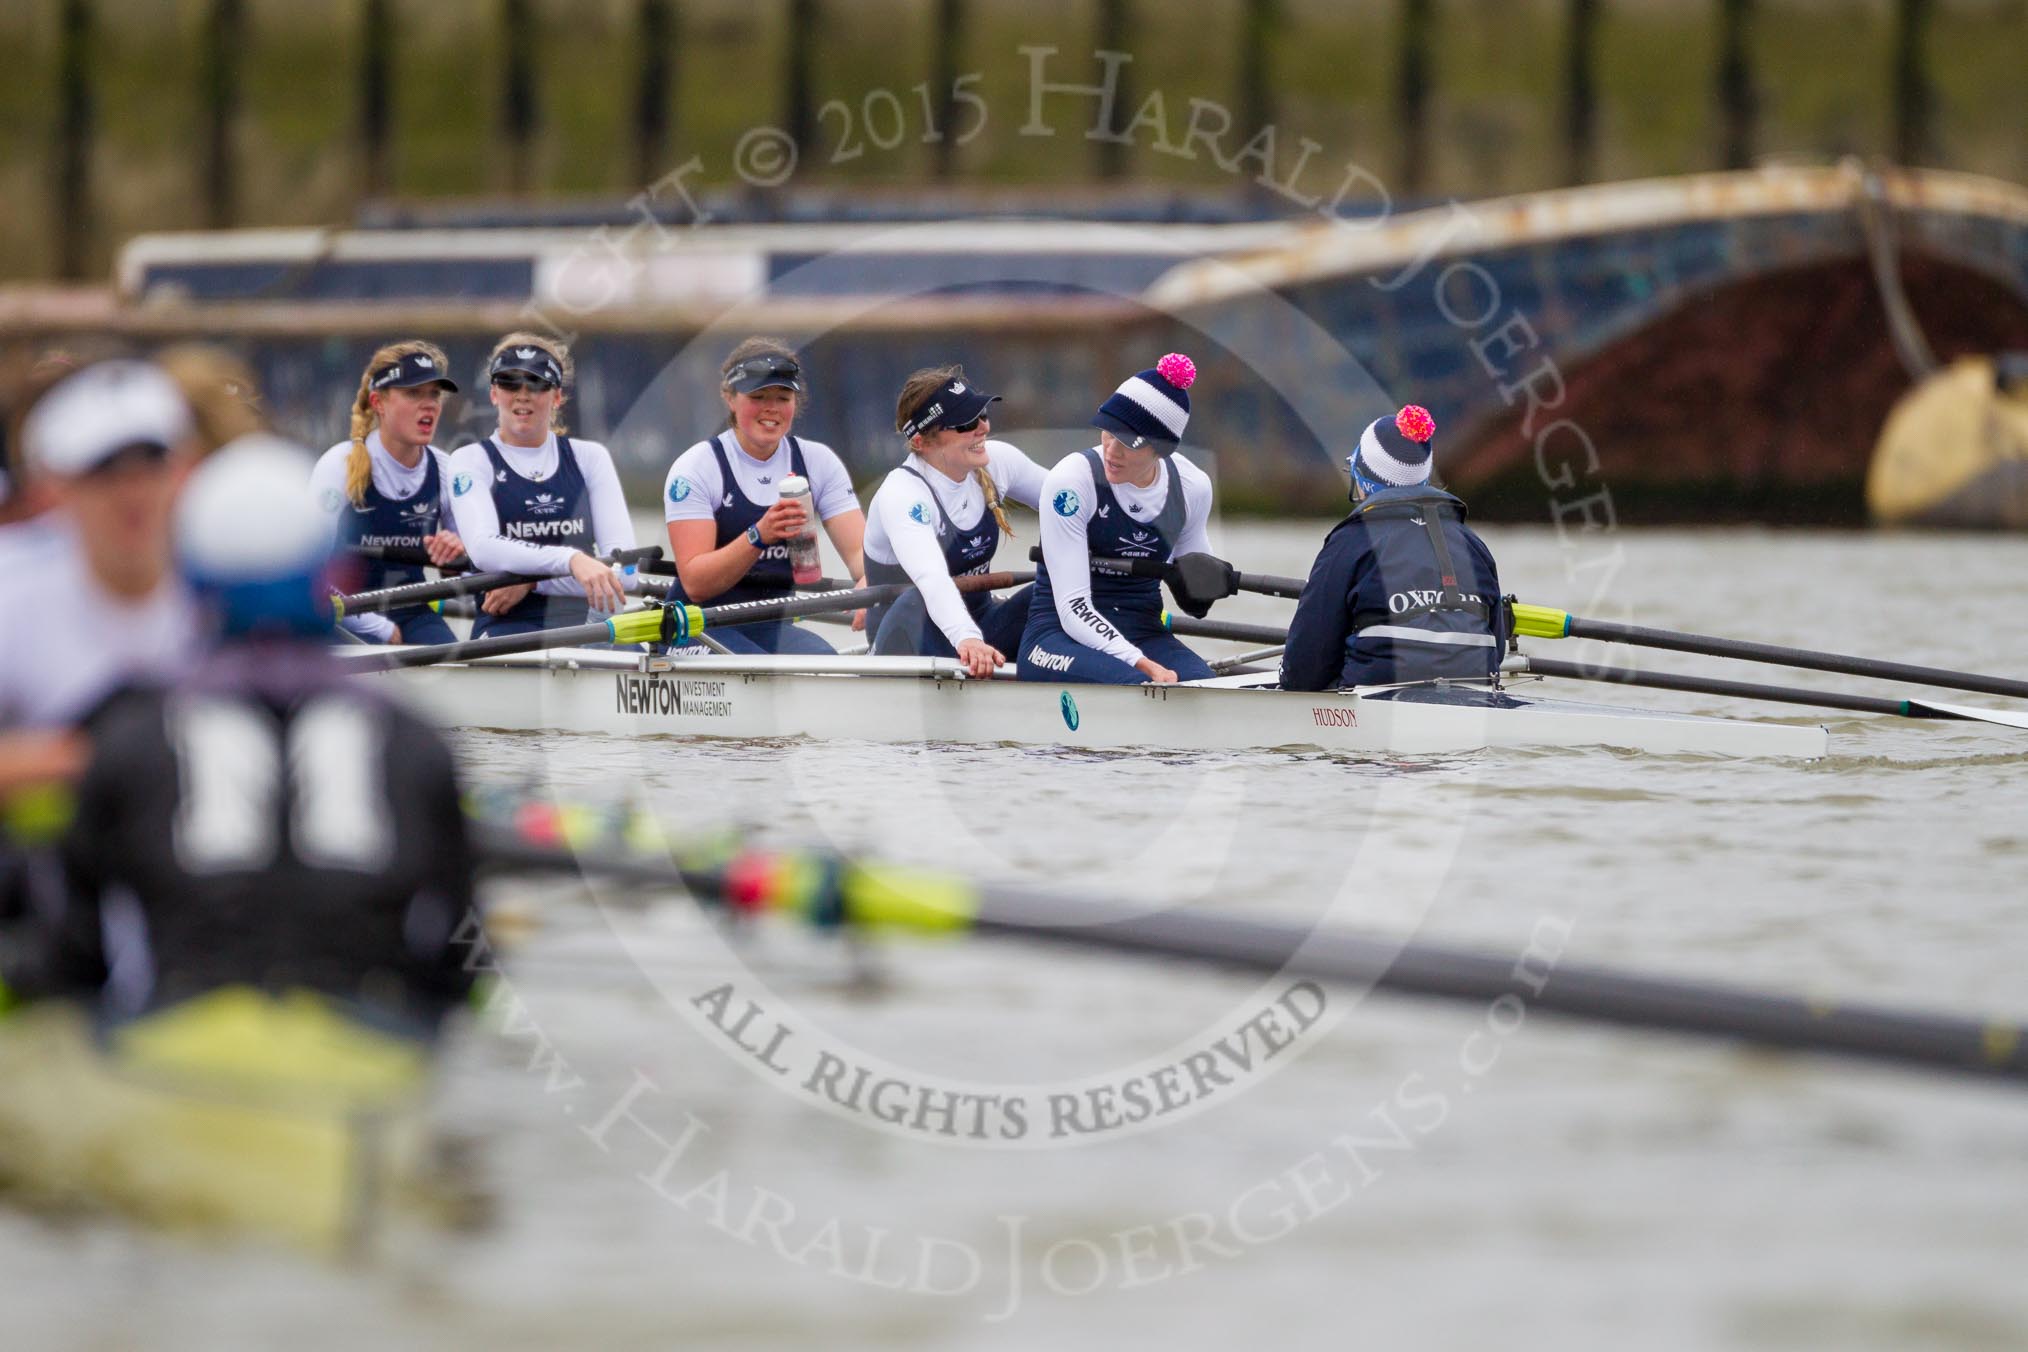 OUWBC and Molesey BC during a break between the second and third race